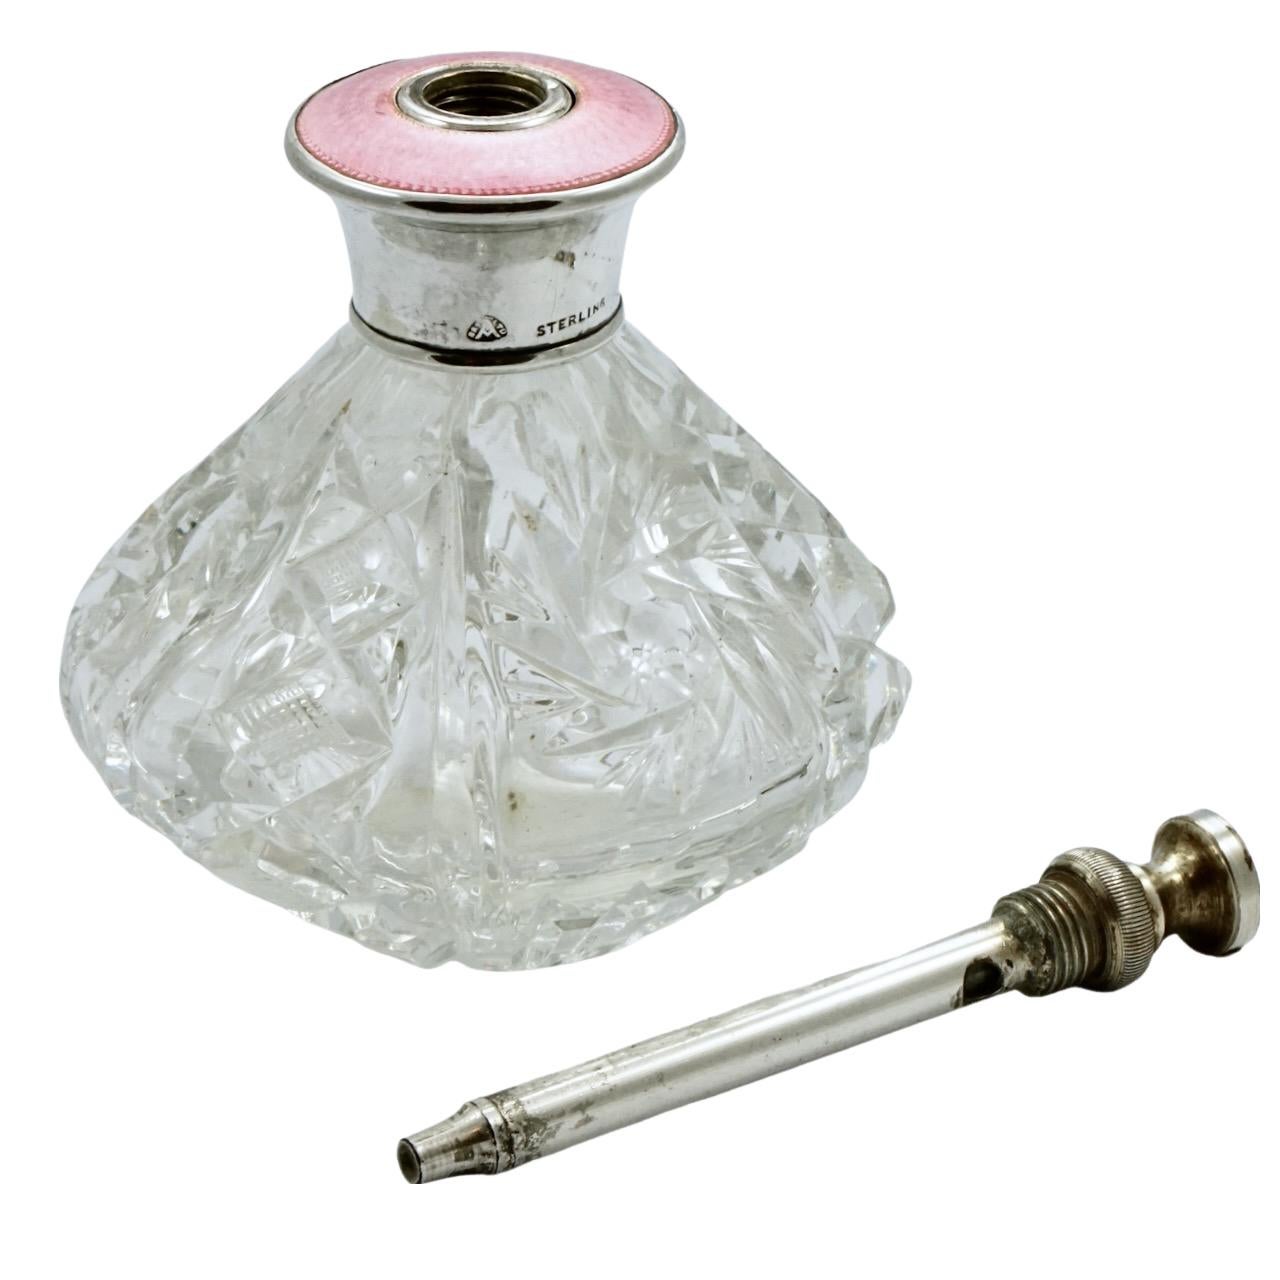 pink perfume with silver top